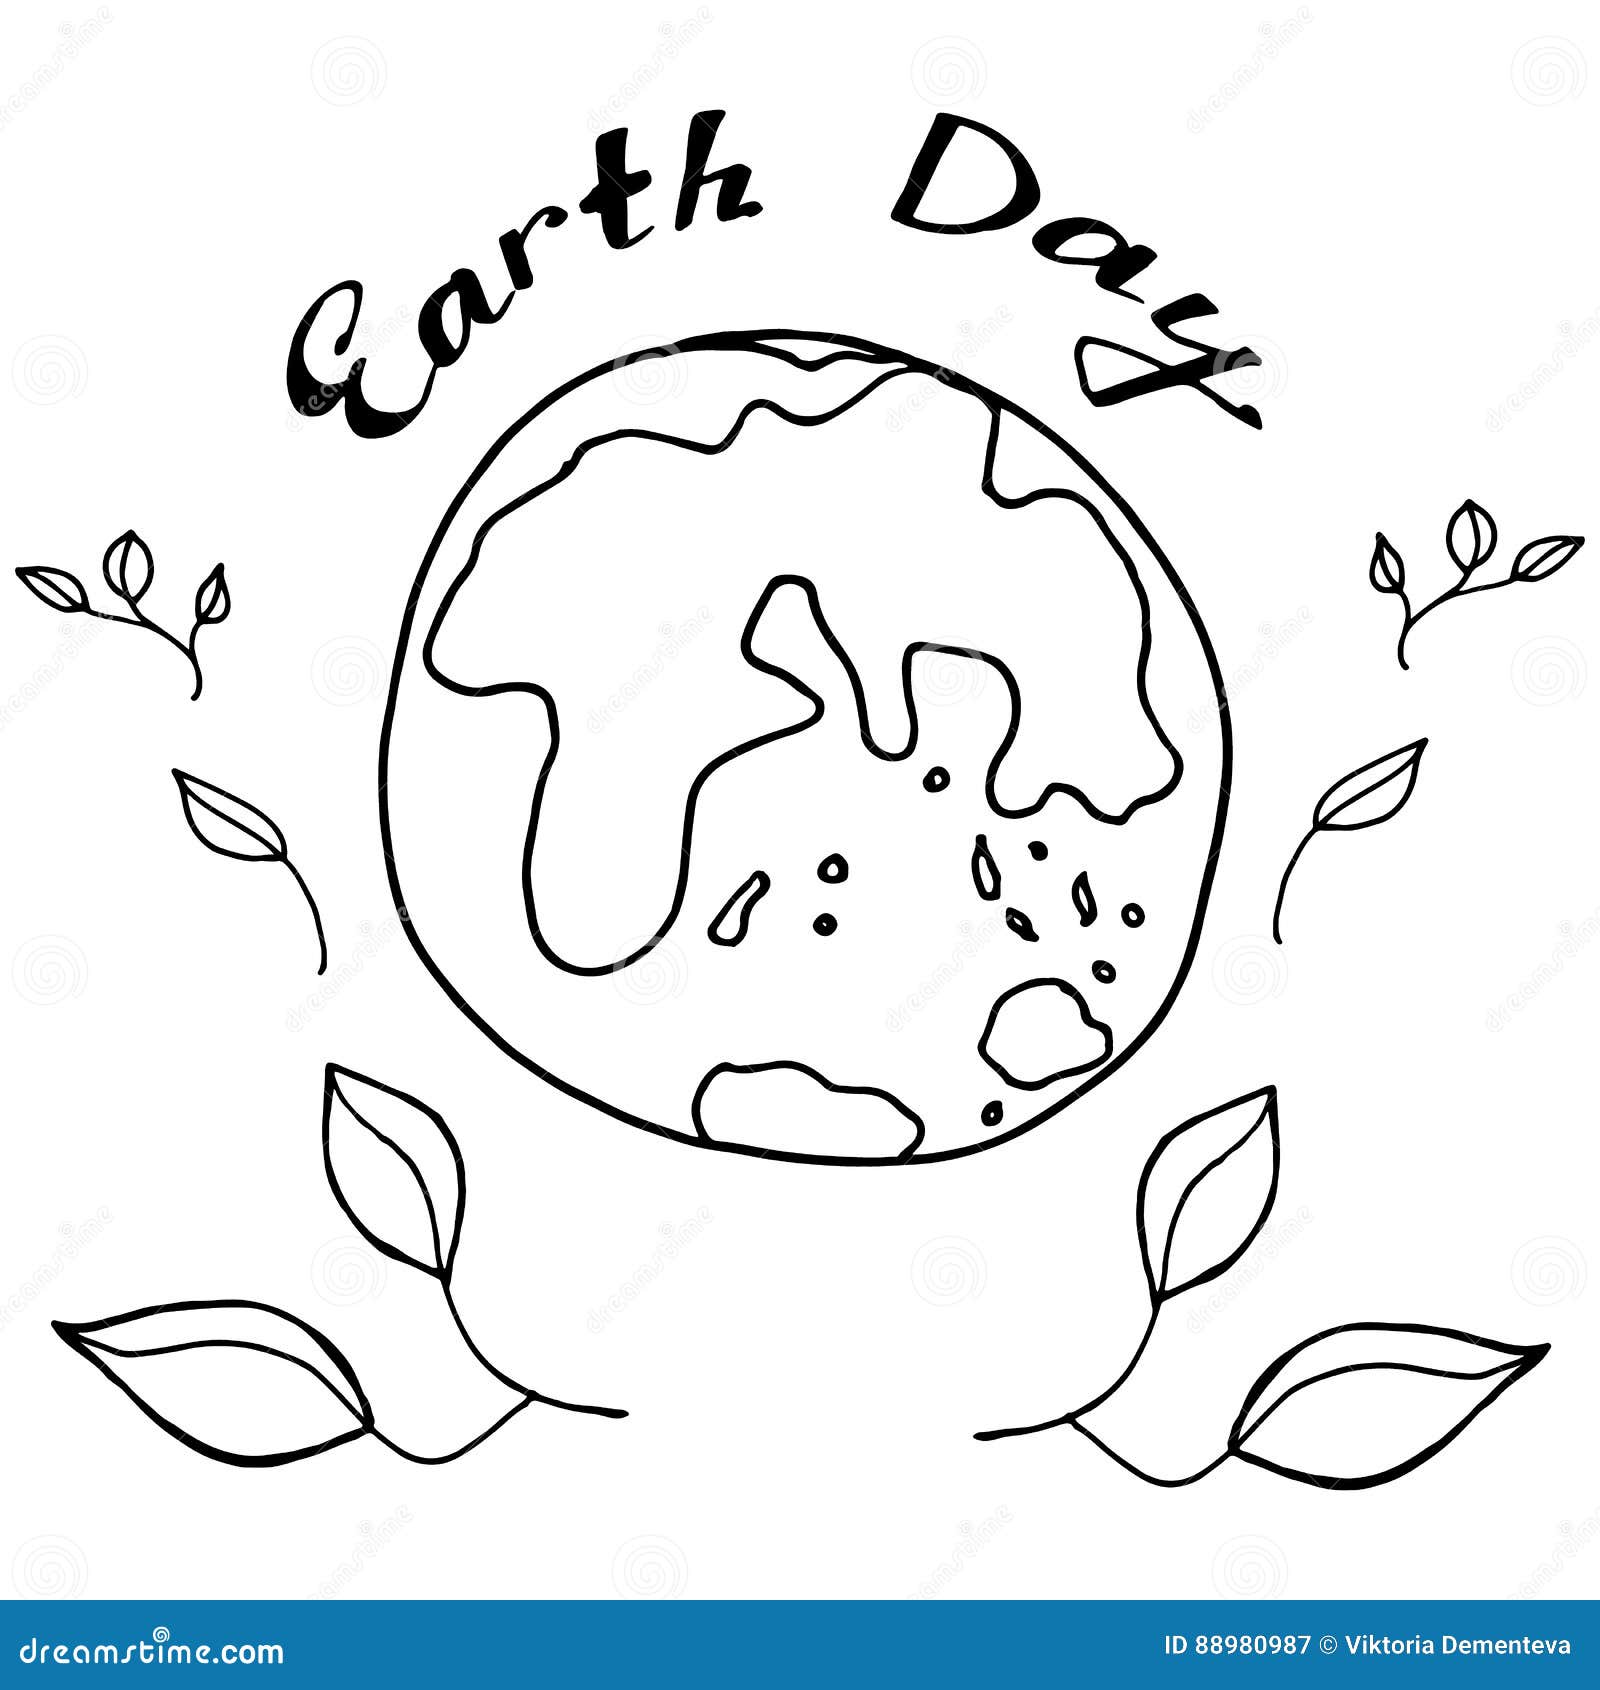 Happy Earth Day!” coloring page – Alice the Chalice